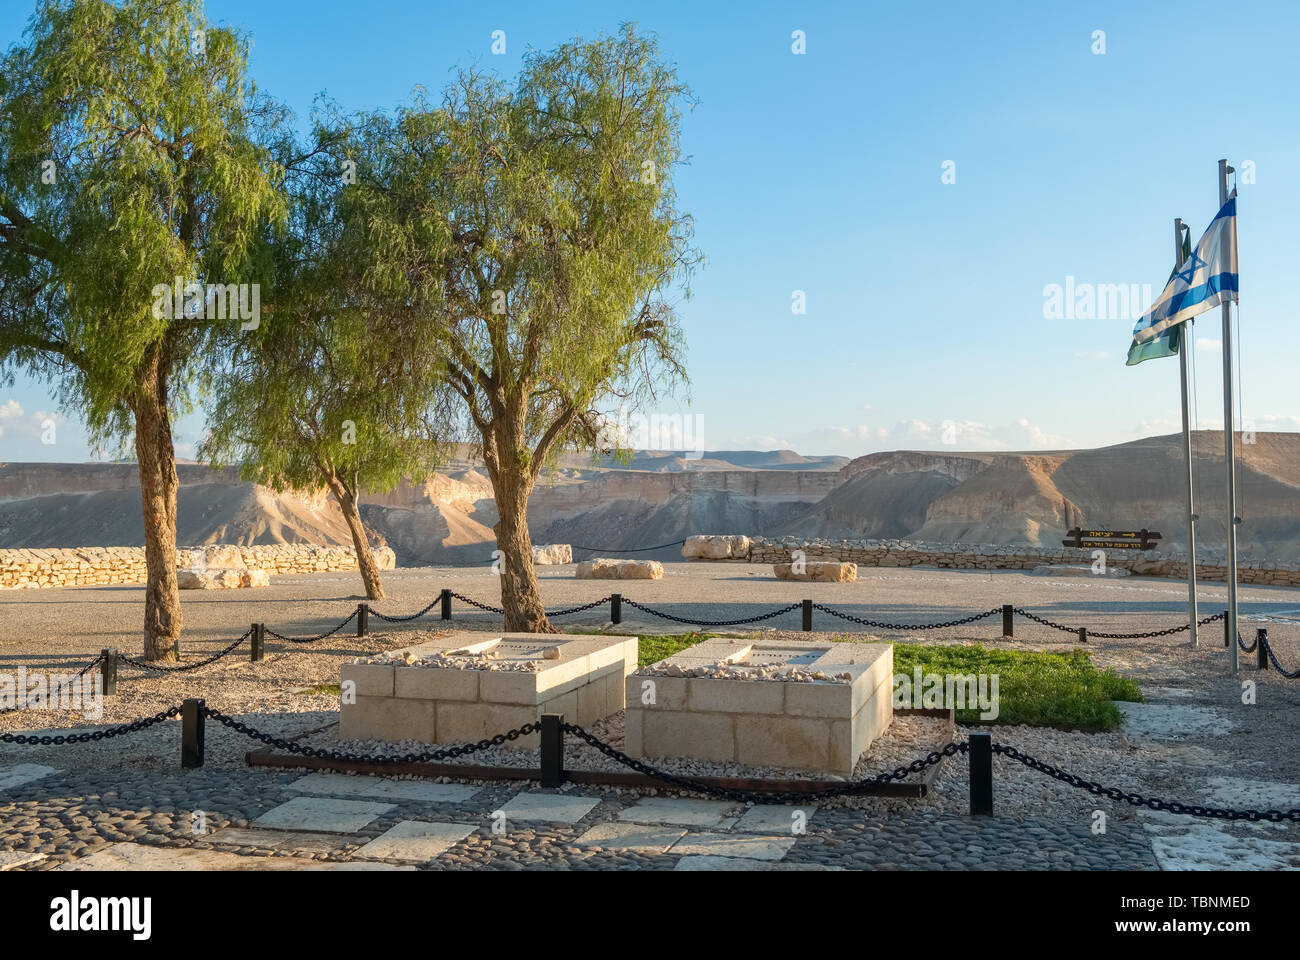 The tomb of the founder of the State of Israel, Ben-Gurion and his wife in the kibbutz Sde Boker in the Judean Desert, Israel. Stock Photo